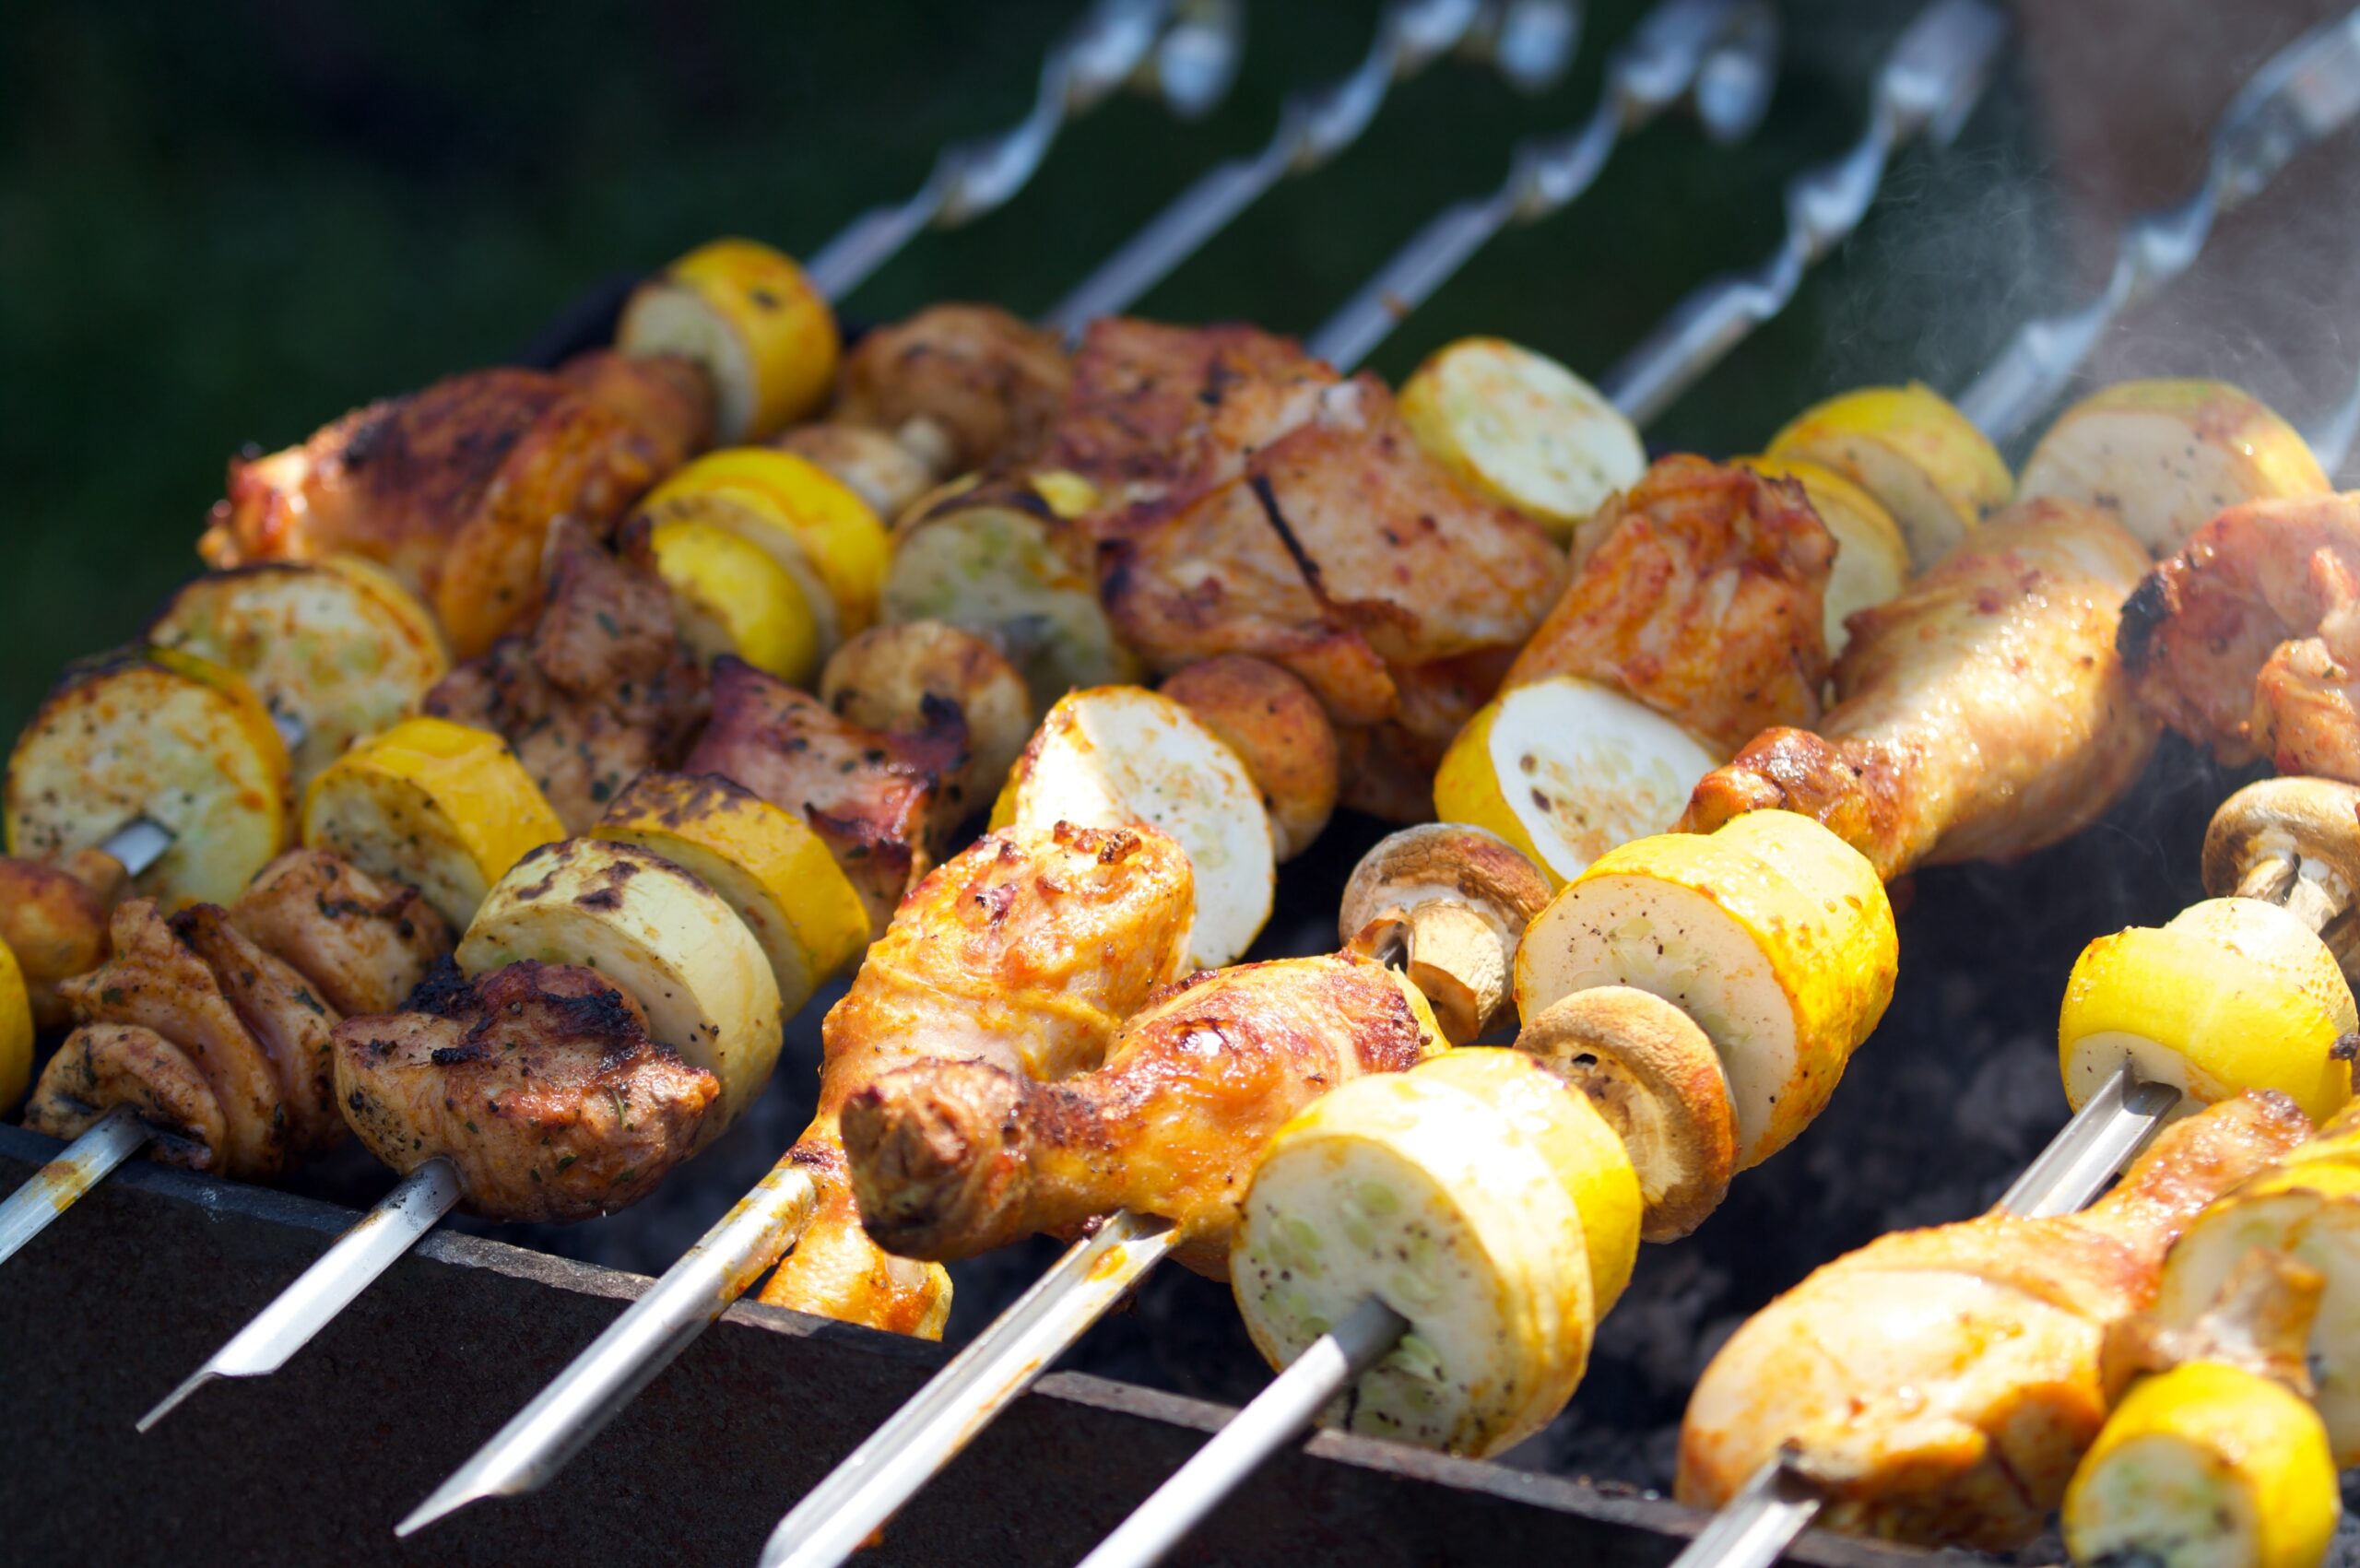 Don't Hire a Caterer: Summer Barbecue